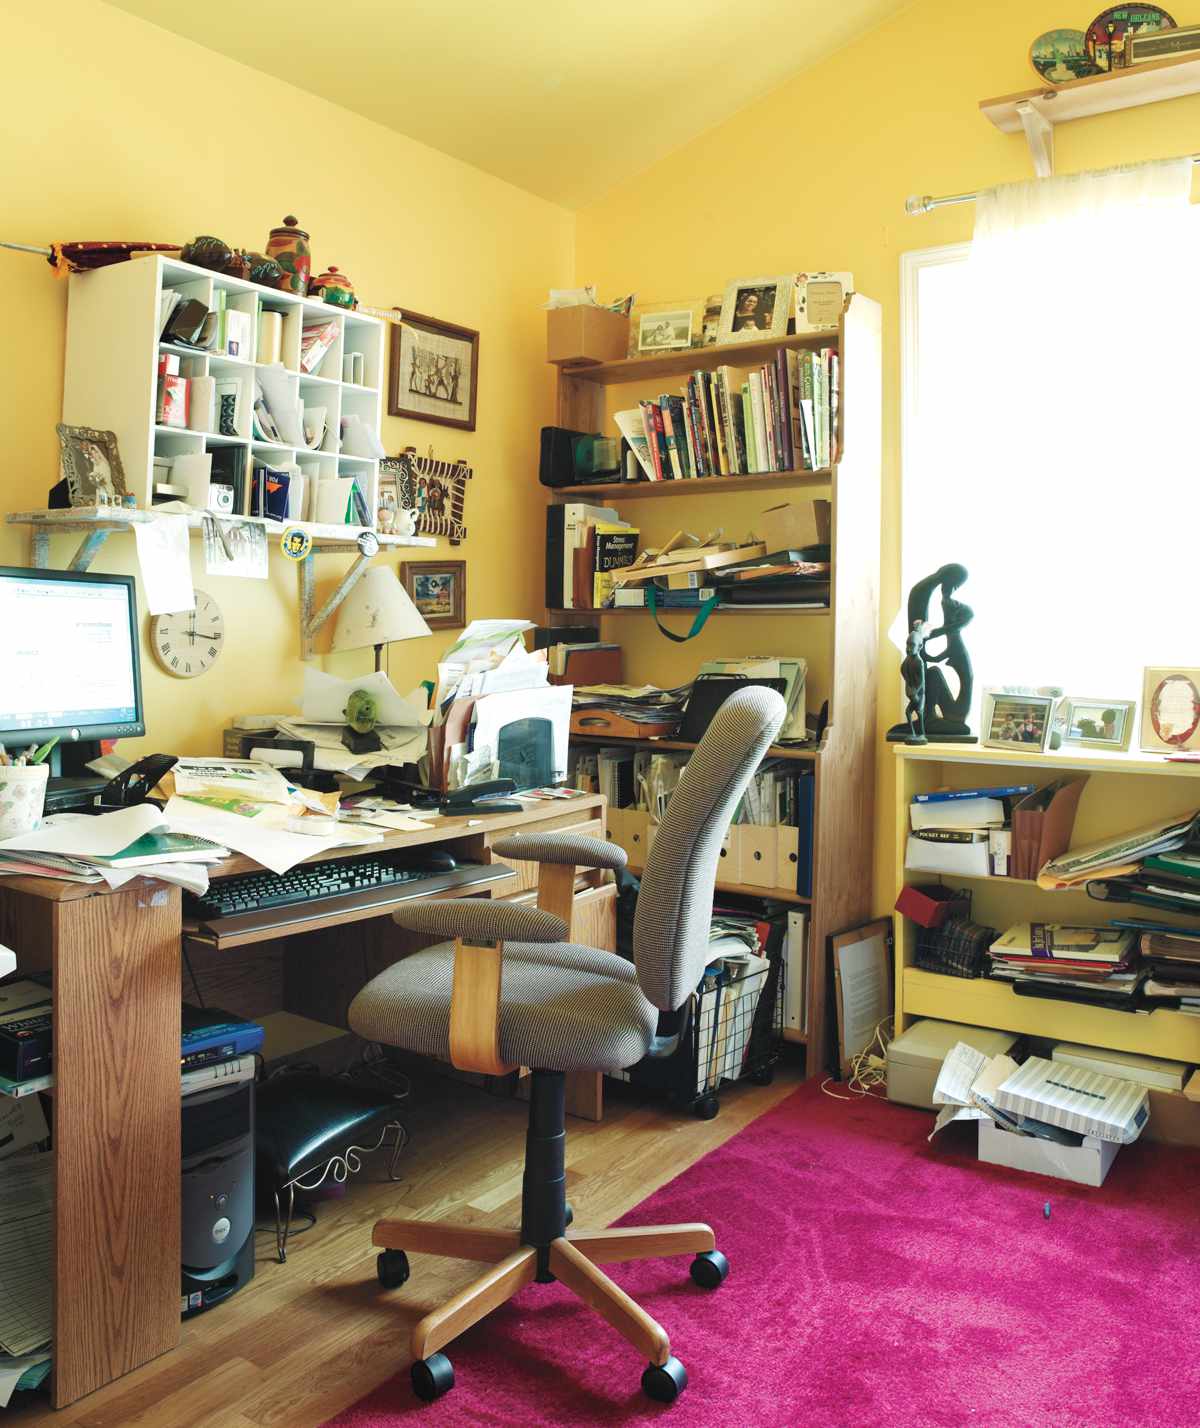 A cluttered home office